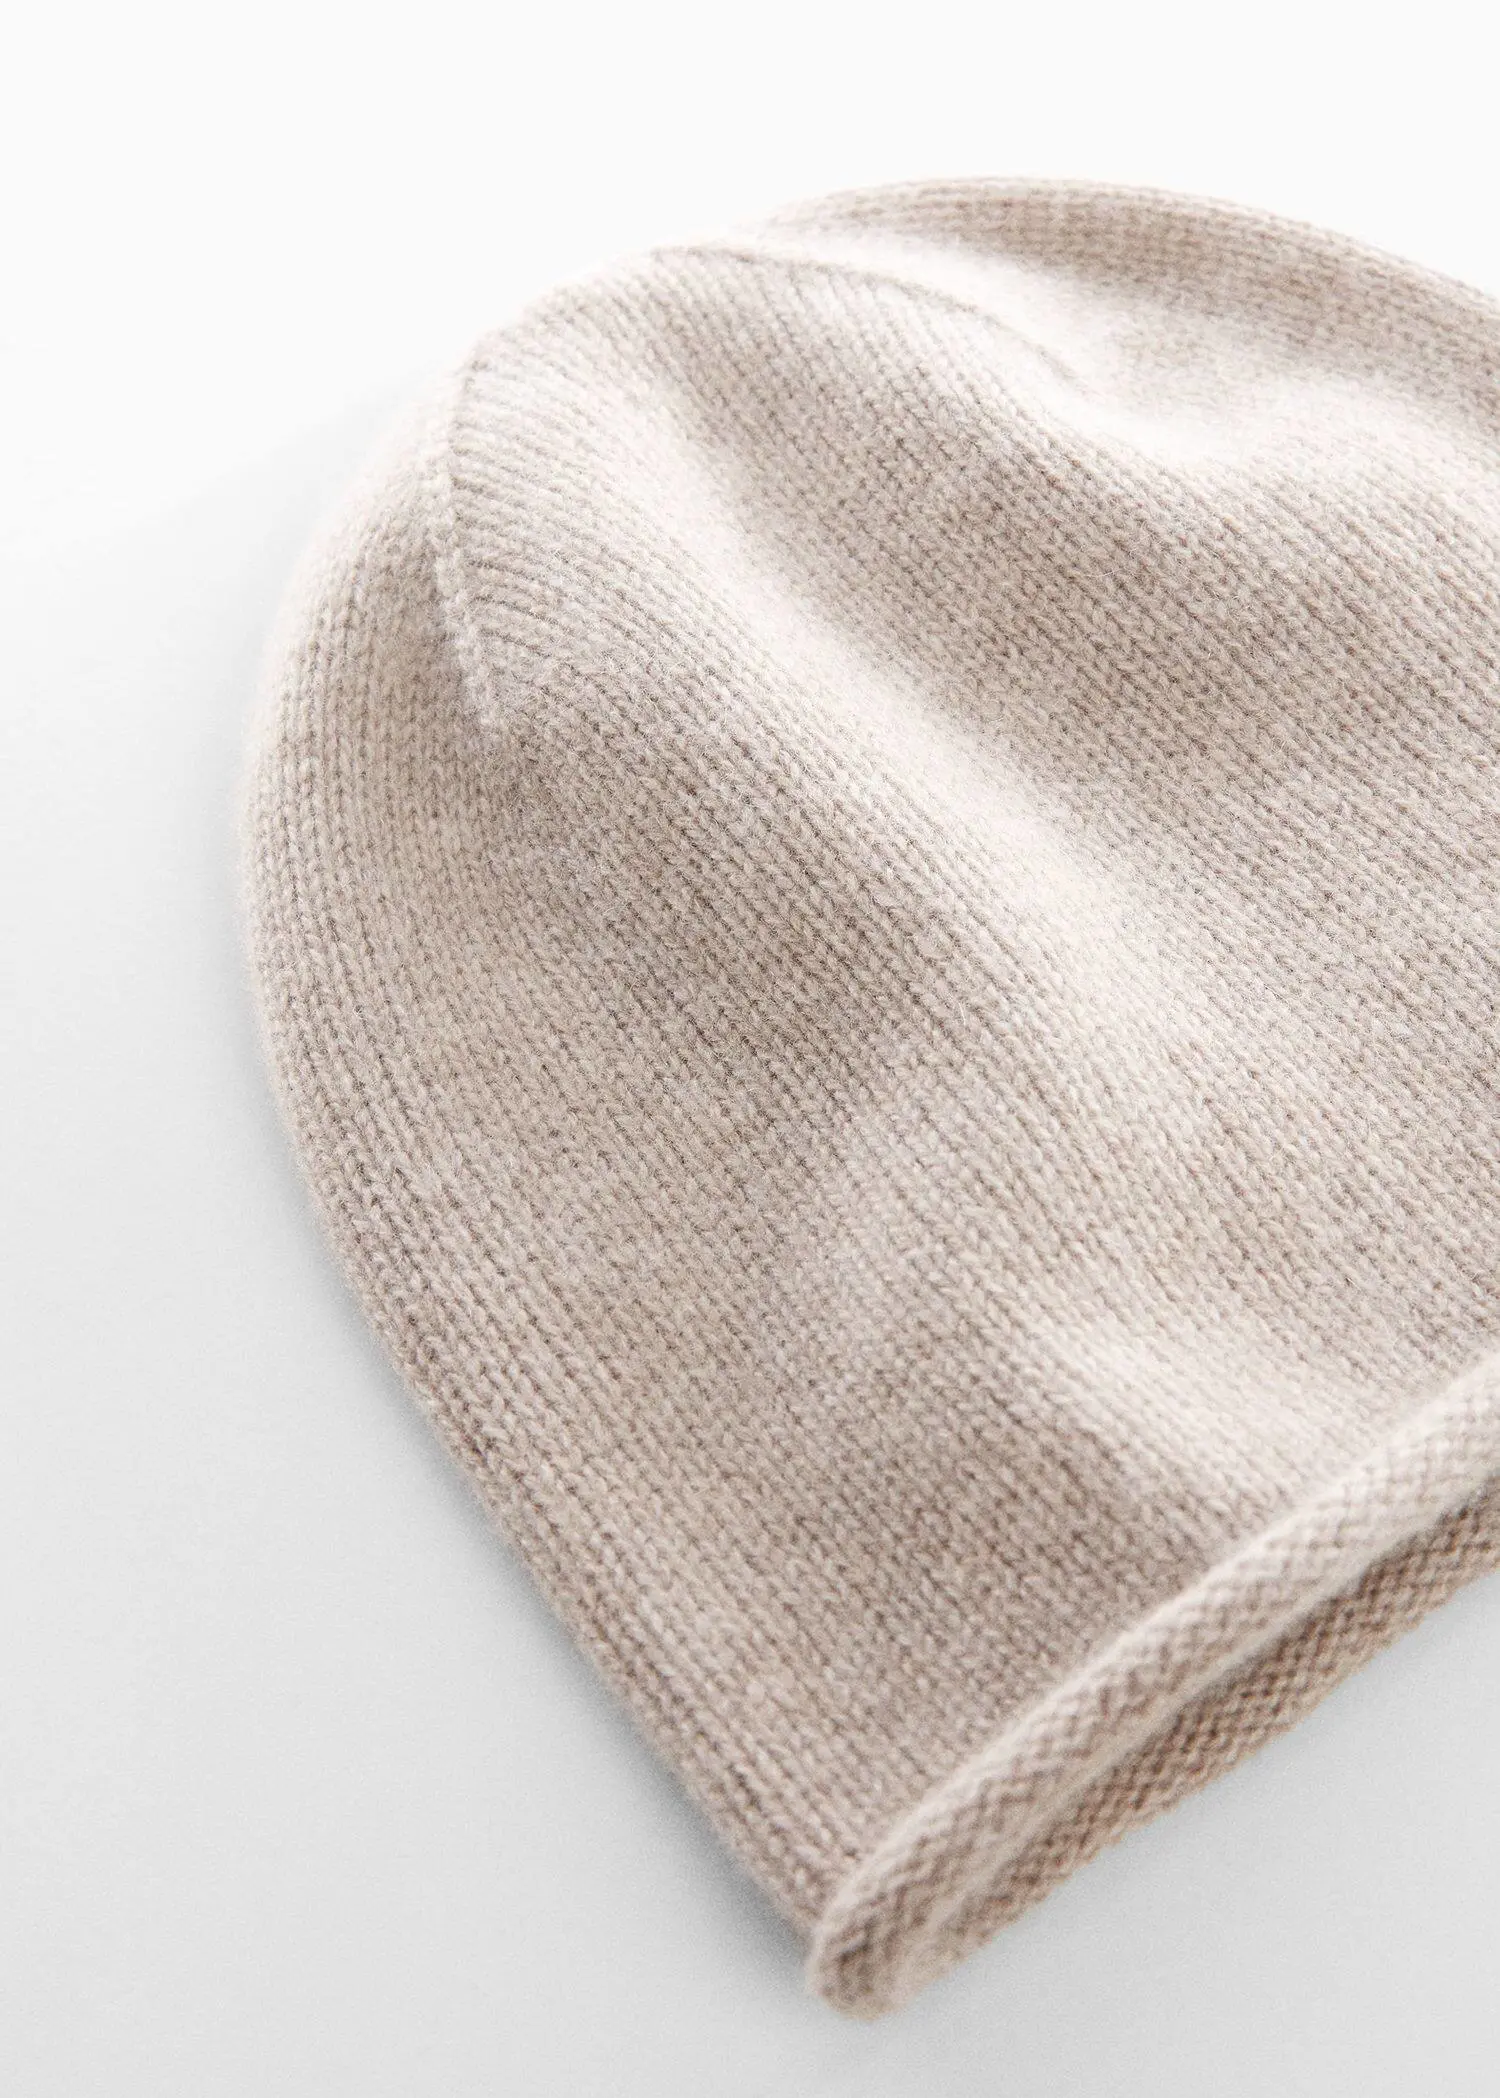 Mango Cashmere knitted hat. 2